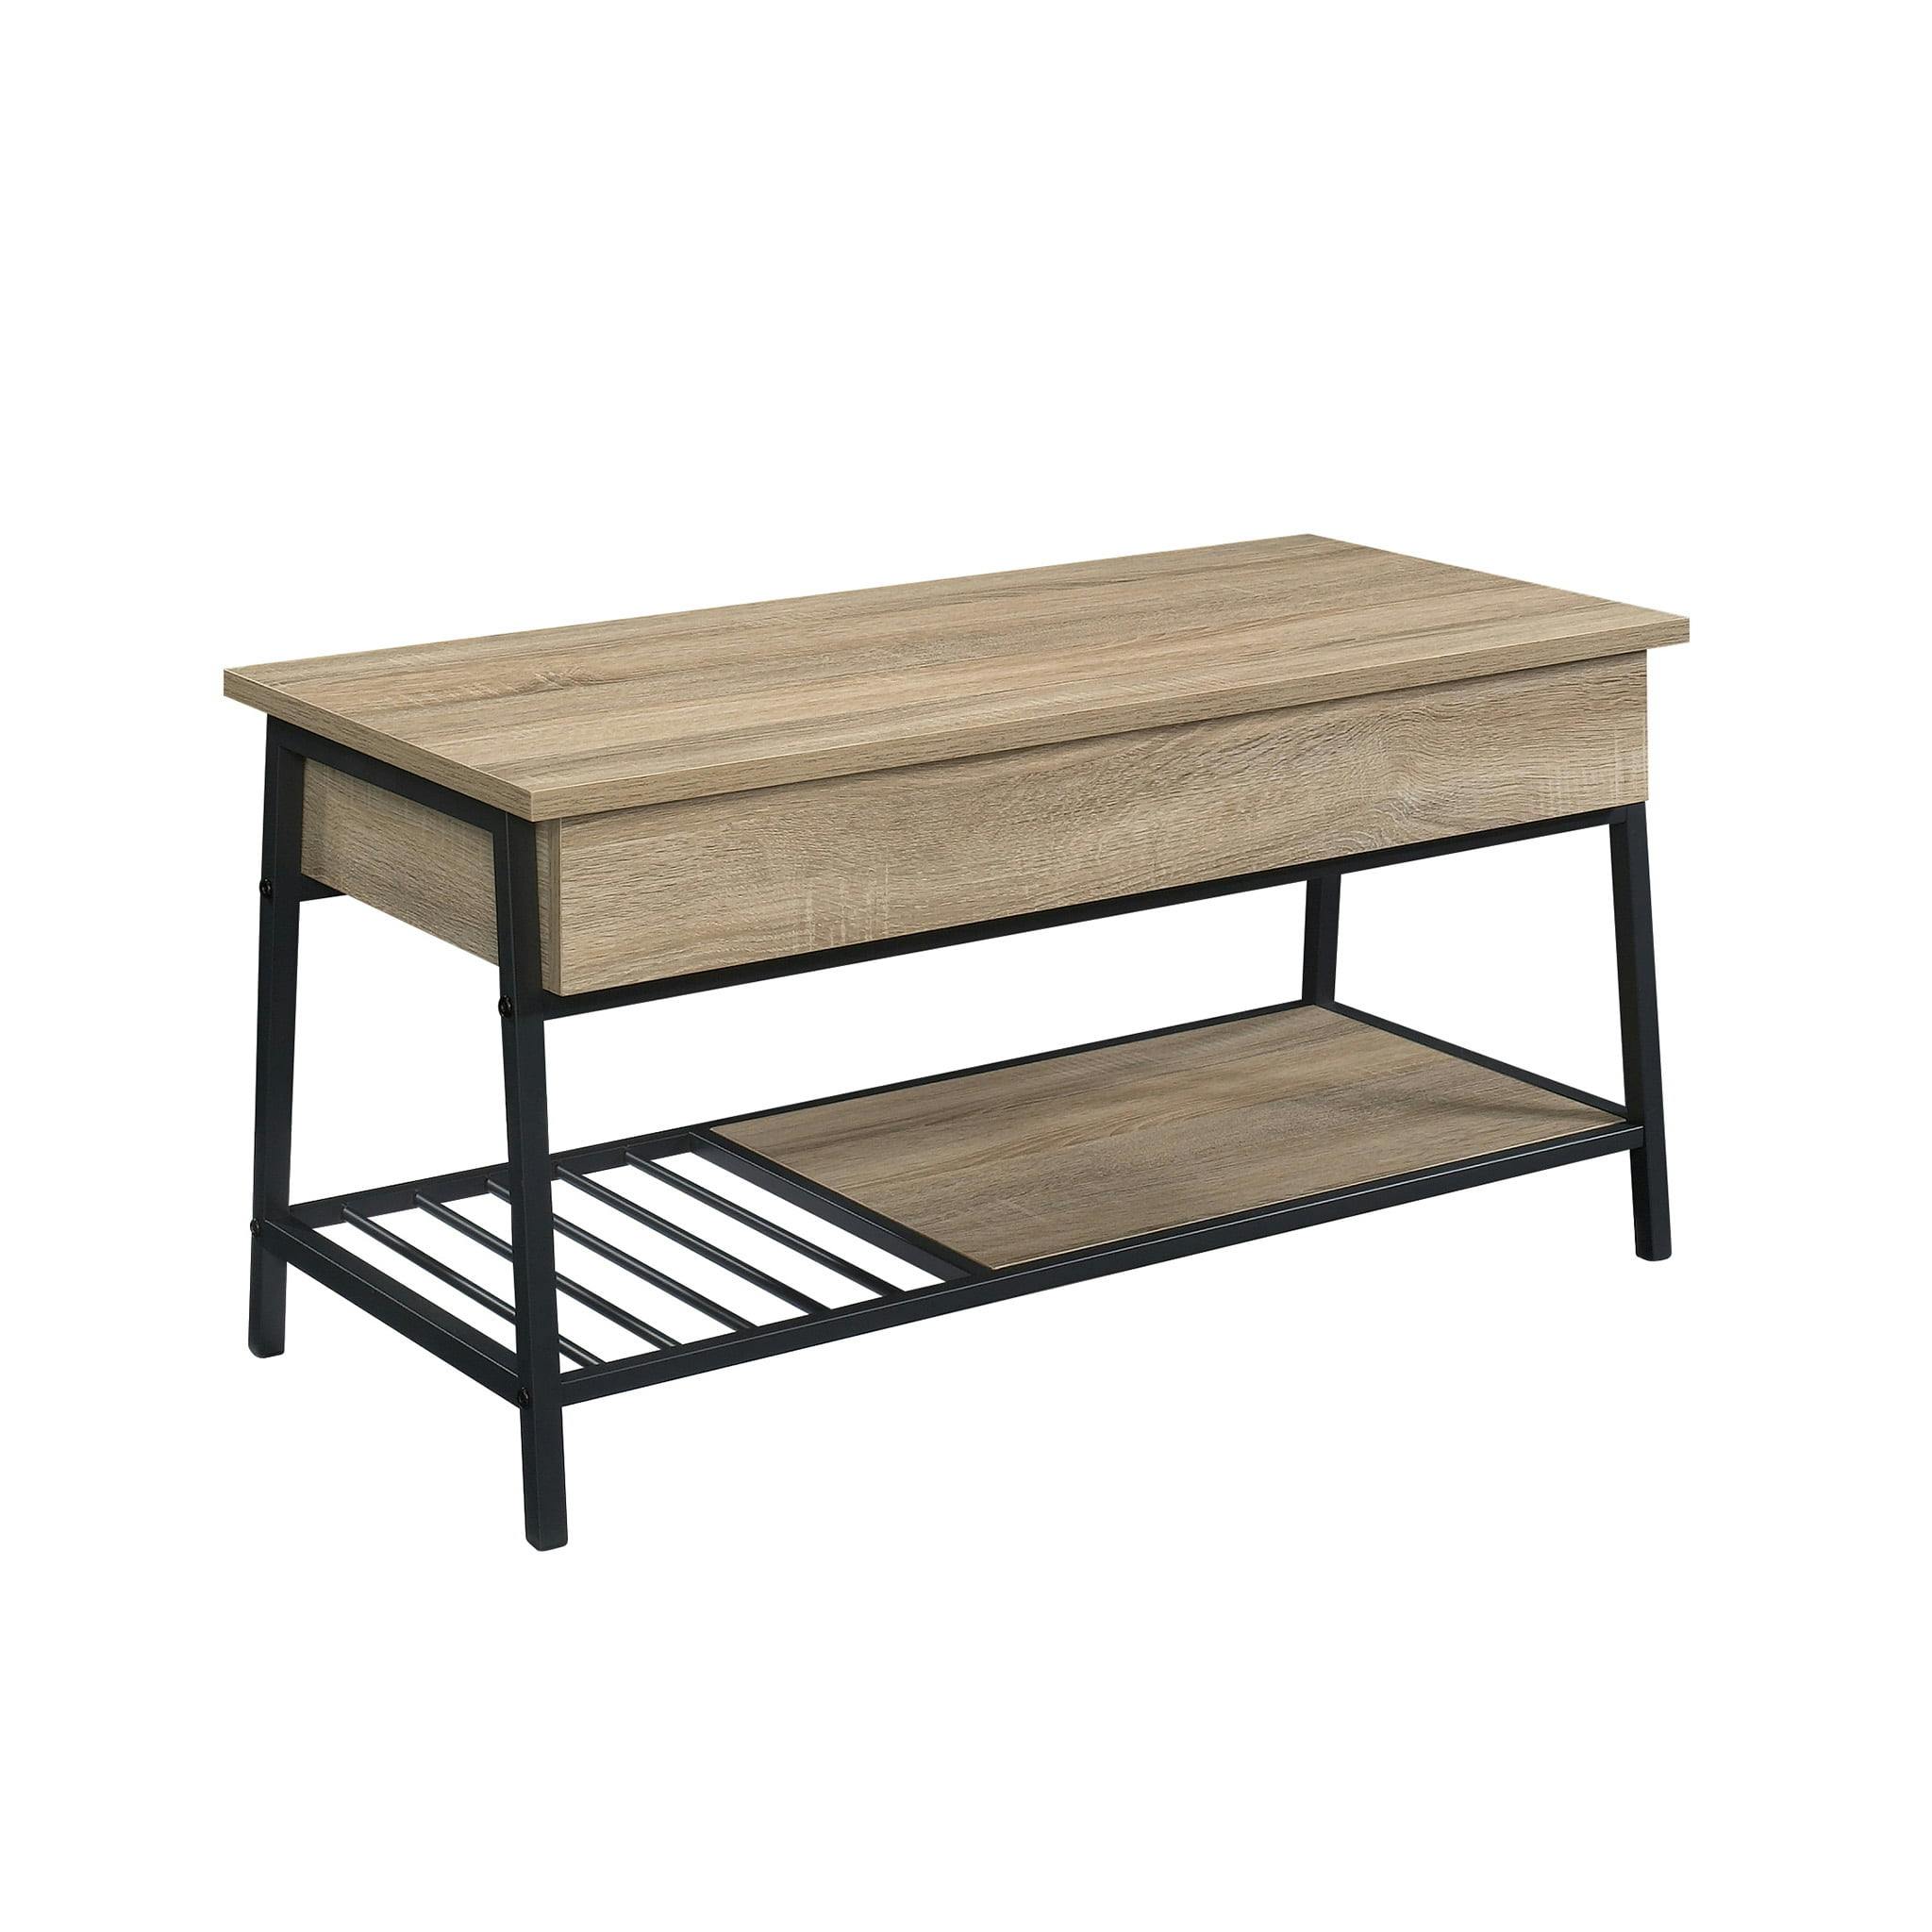 Charter Oak Lift-Top Coffee Table with Hidden Storage